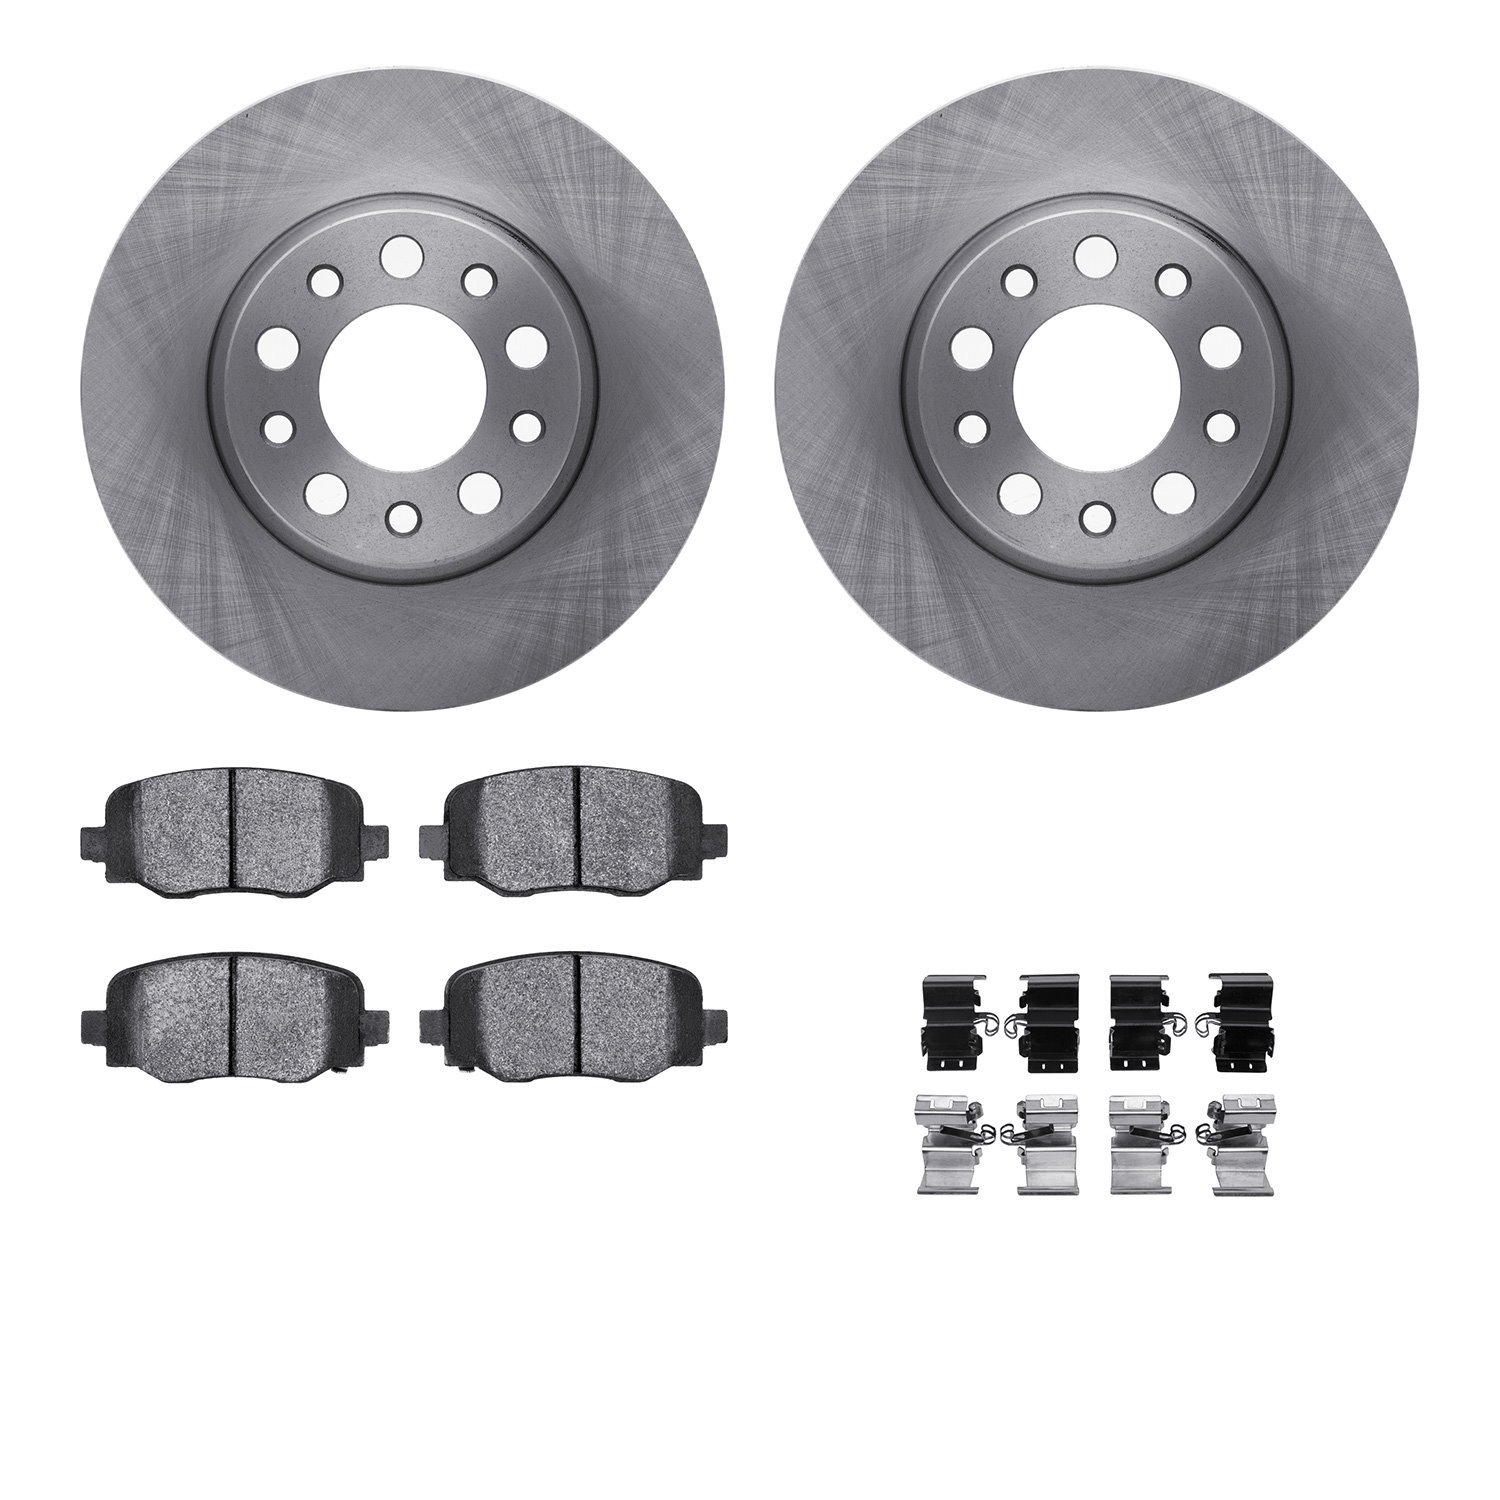 6312-42050 Brake Rotors with 3000-Series Ceramic Brake Pads Kit with Hardware, Fits Select Mopar, Position: Rear